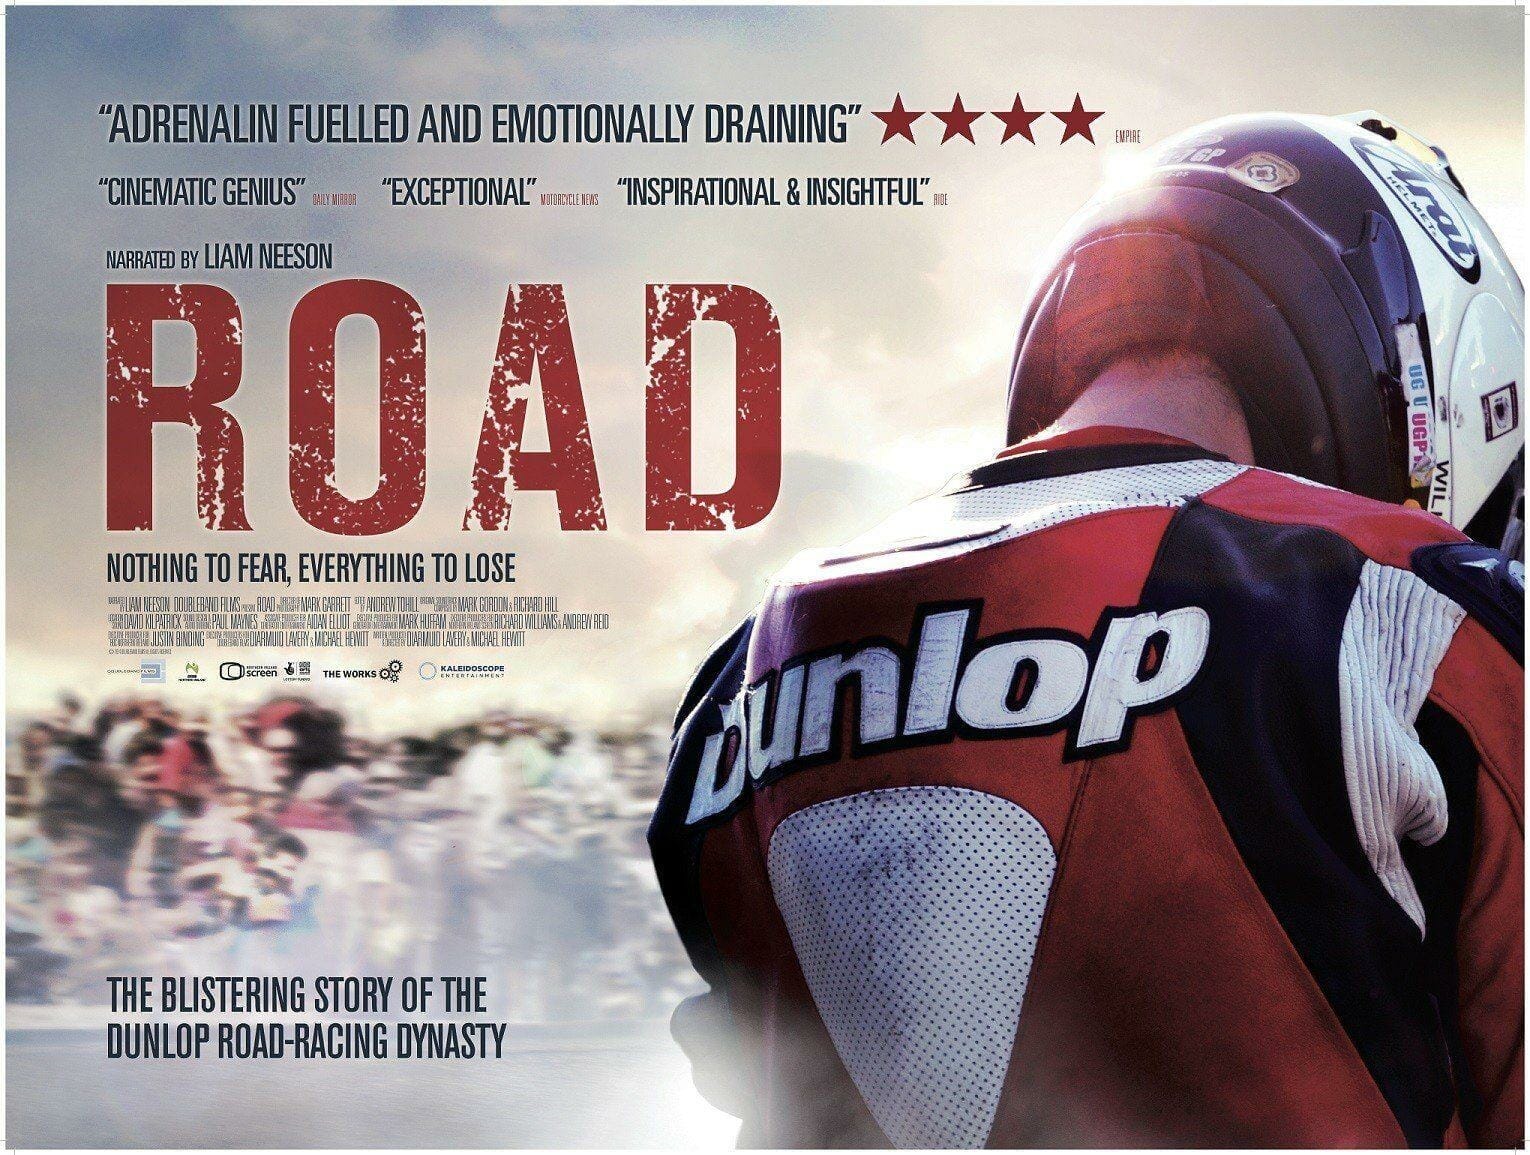 ROAD – the DVD about the Dunlop clan, the light and dark sides of the road race